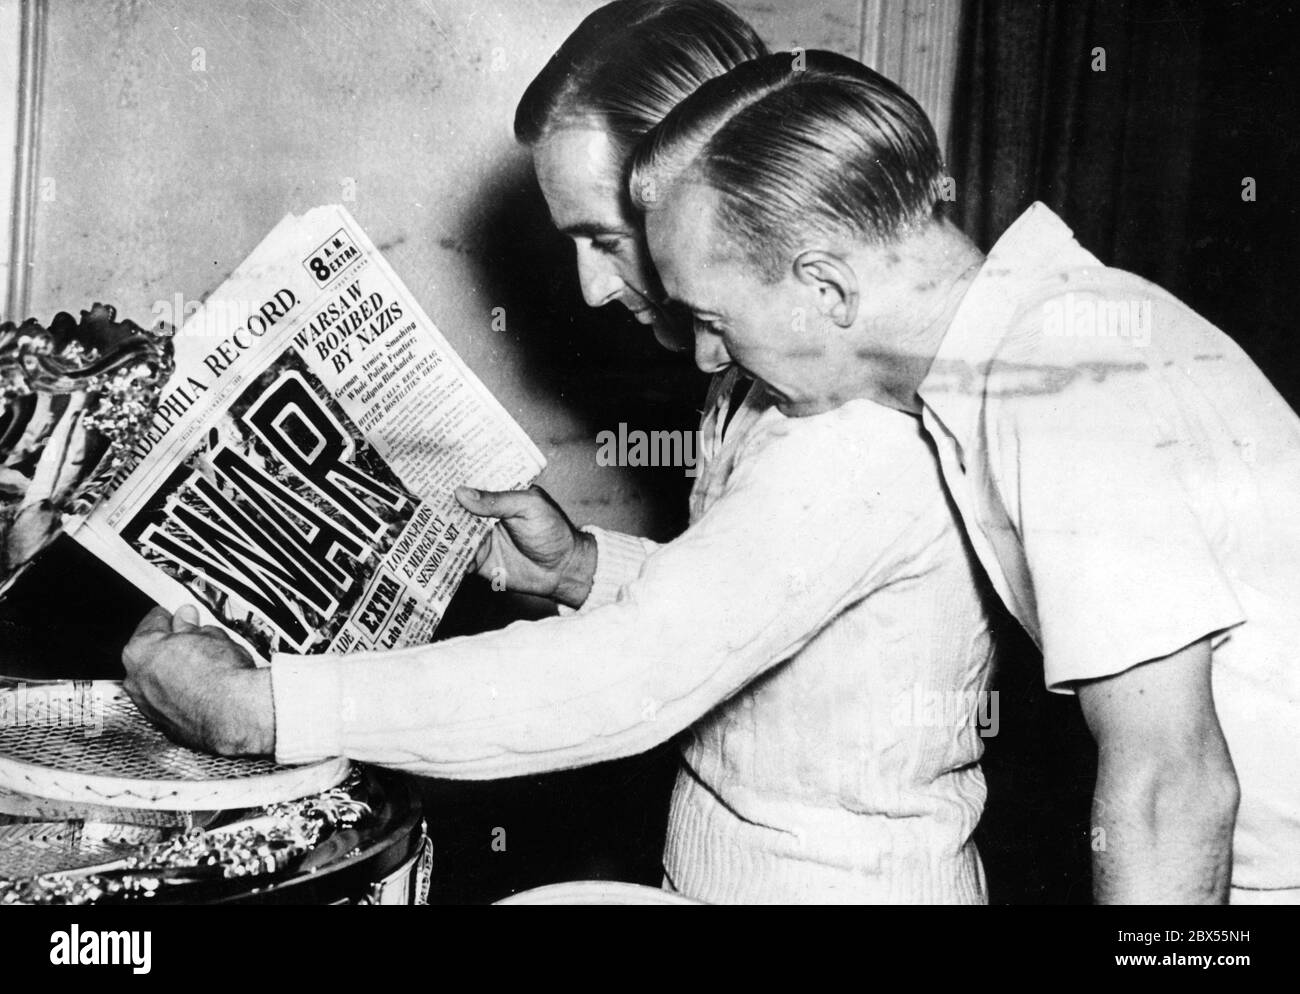 Adrian Quist (left), tennis player in the Australian Davis Cup team, and Harry Hopman (right), captain of the team, reading the headlines about the German invasion of Poland and the beginning of the war in an American newspaper, the 'Philadelphia Record'. Both belong to the Australian Army Reserve and can expect to be drafted if Great Britain enters the war. Stock Photo